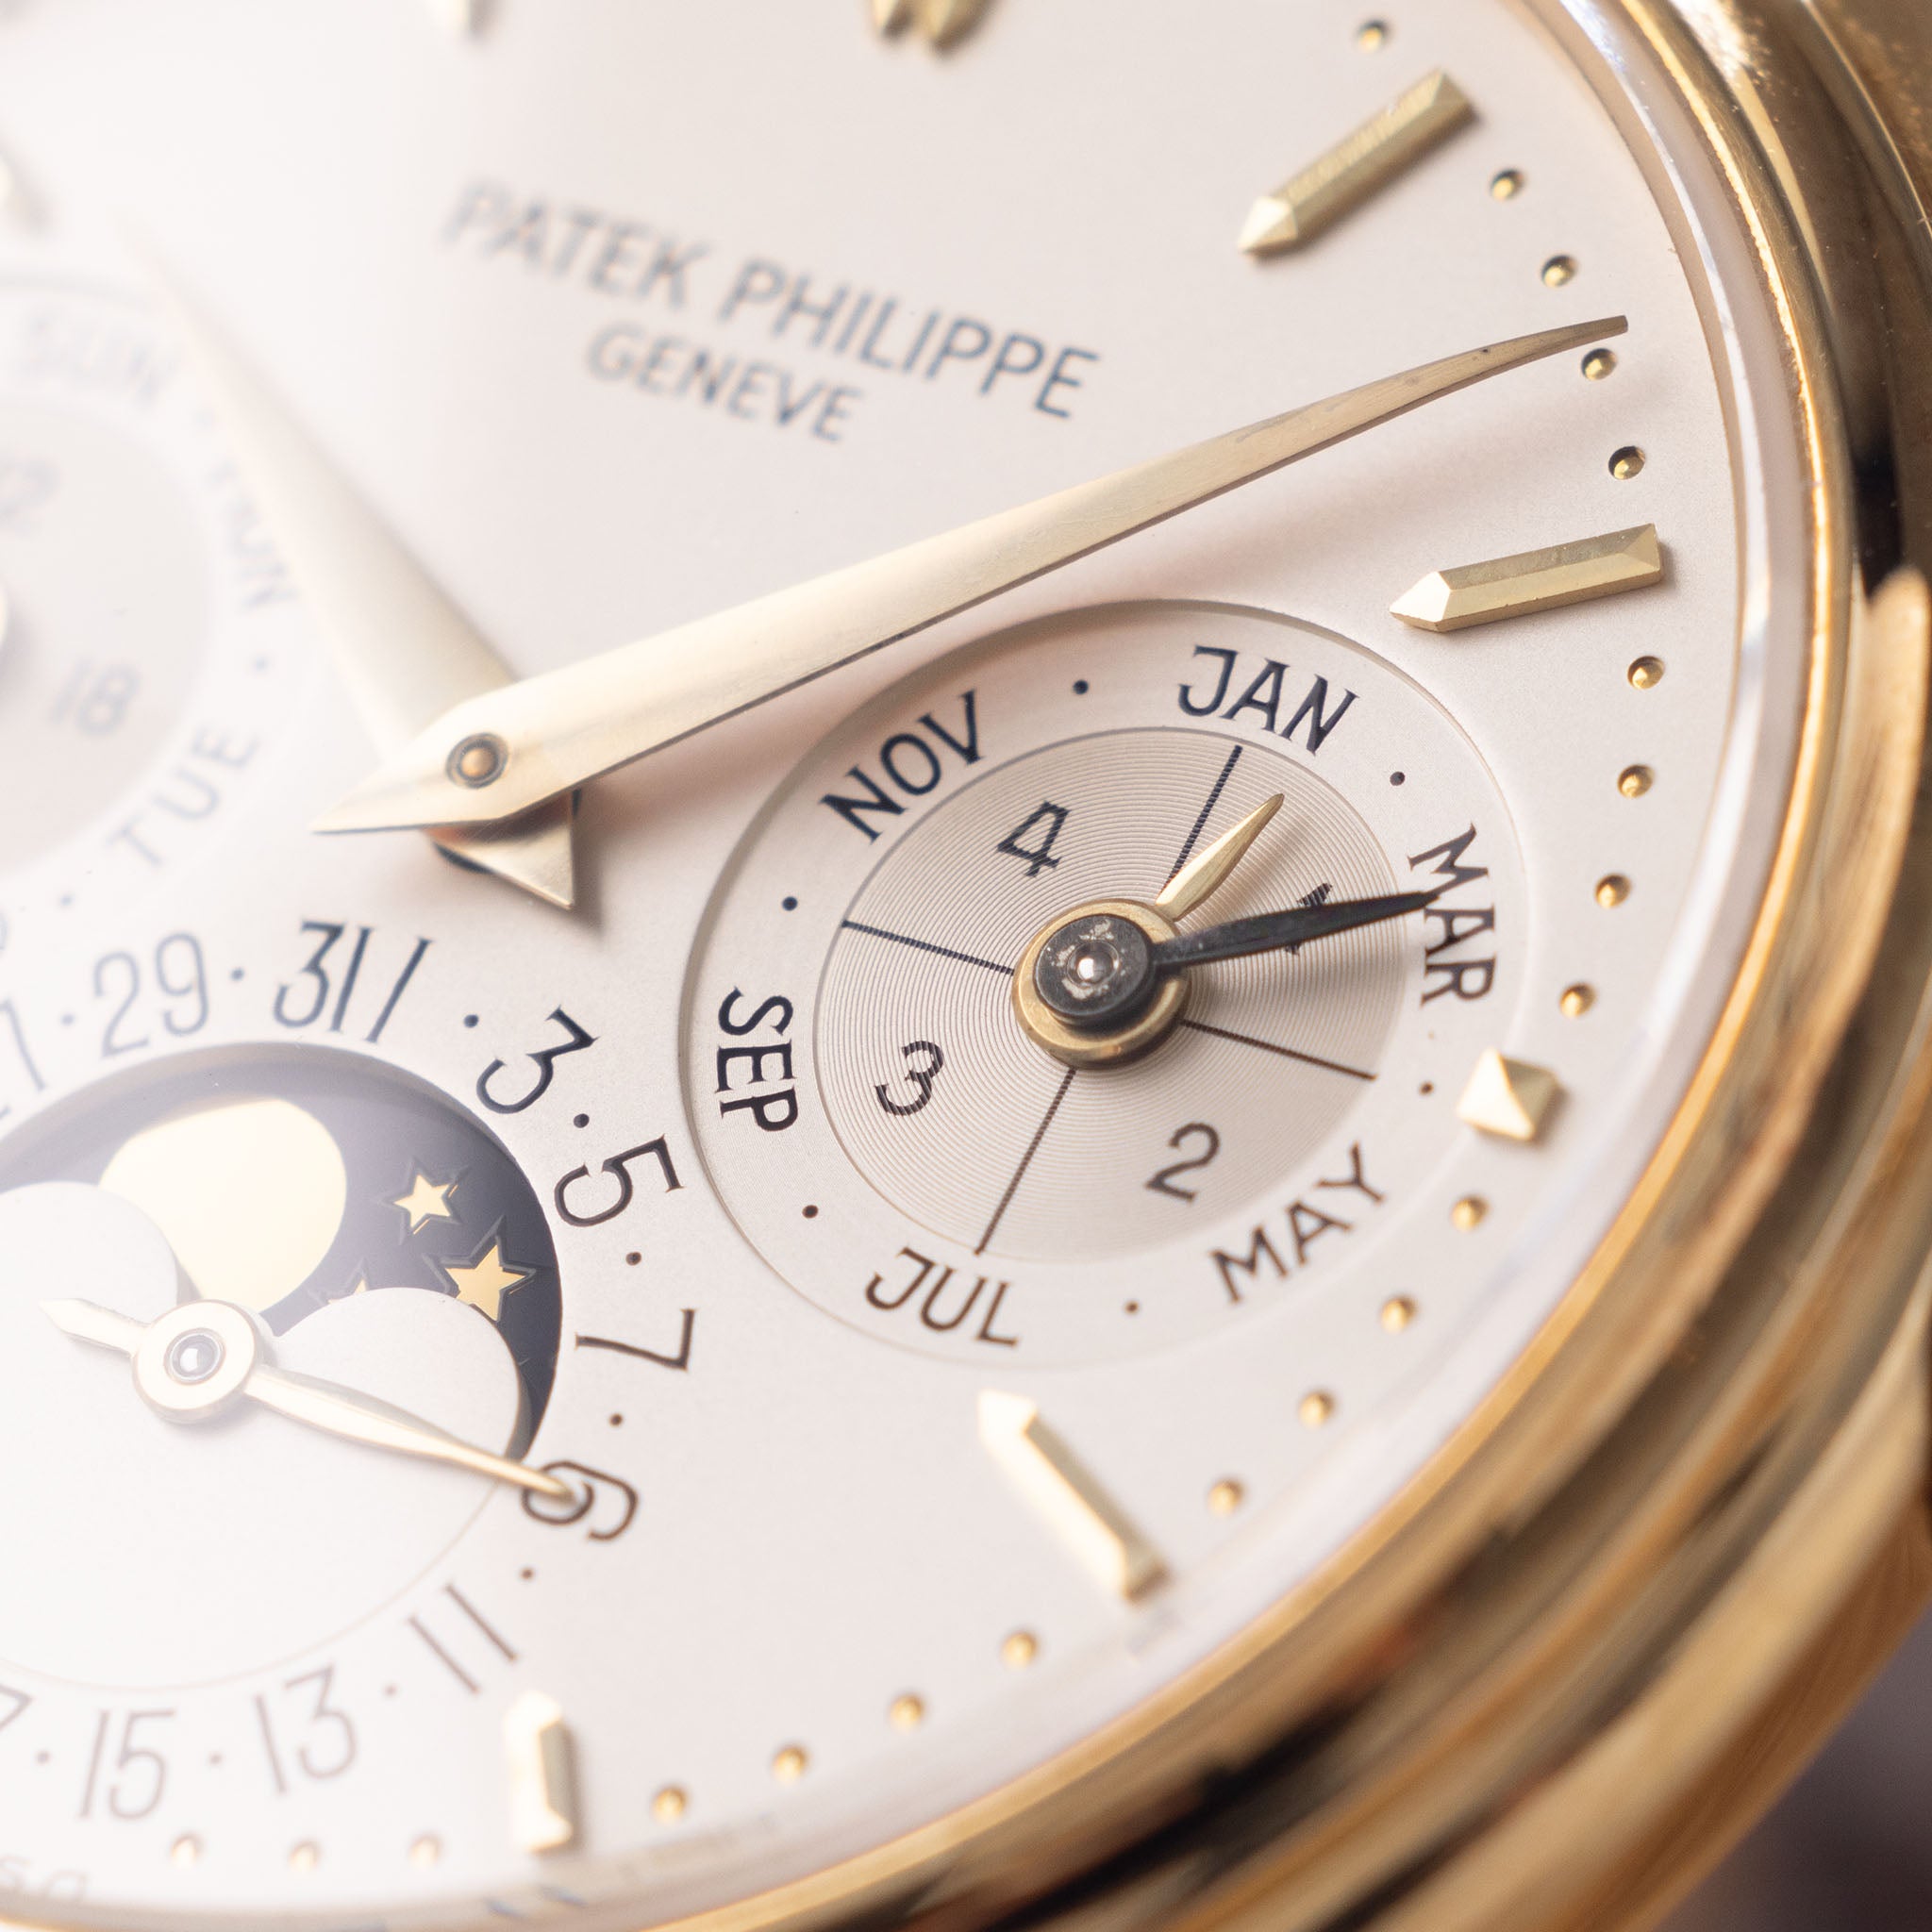 Patek Philippe Perpetual Calendar Second Series with Archive Extract Ref 3940